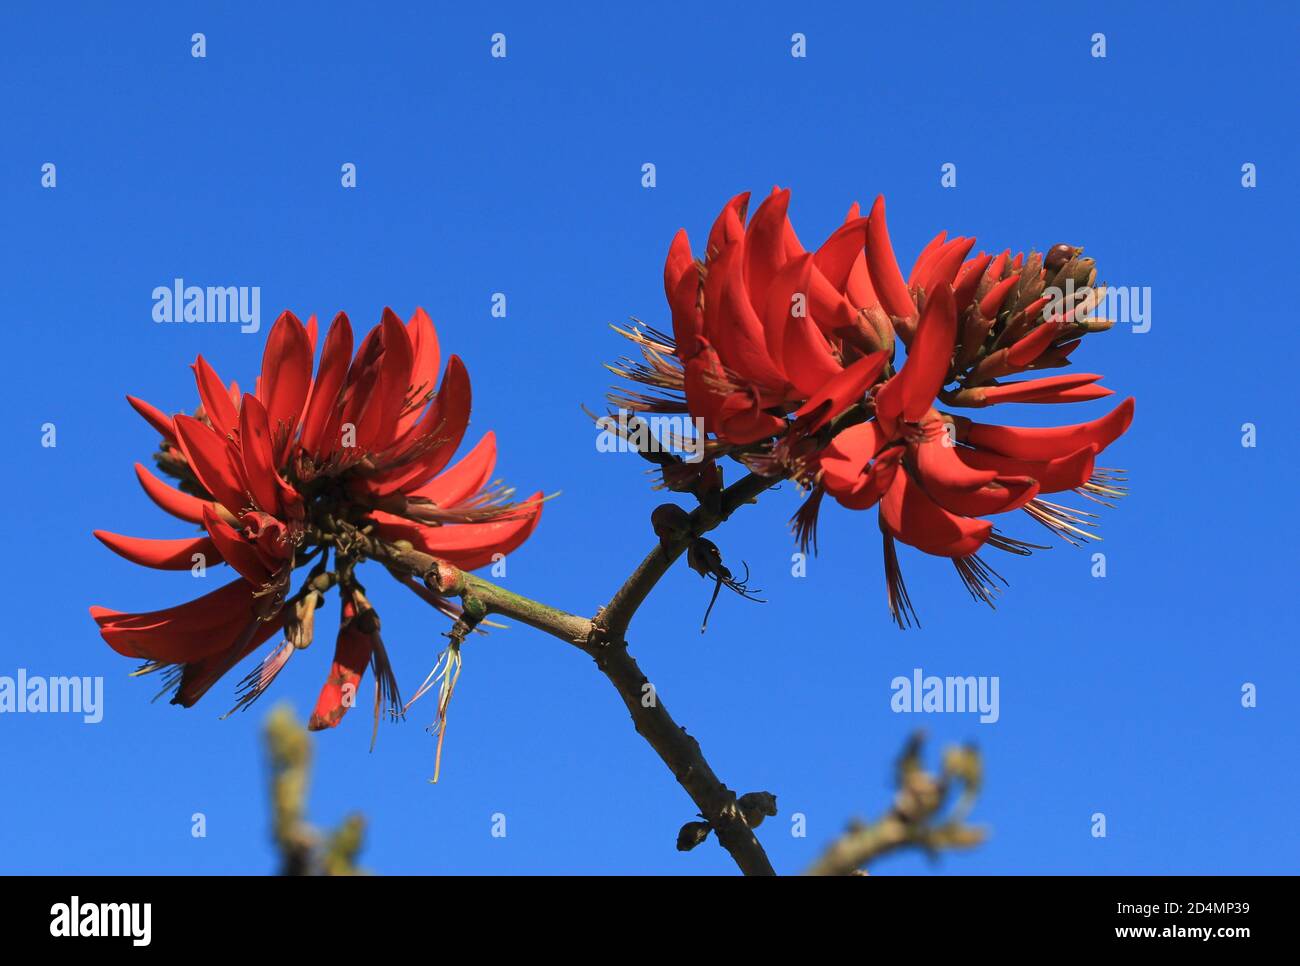 Red flowers of Erythrina caffra (Coast coral-tree) against blue sky Stock Photo